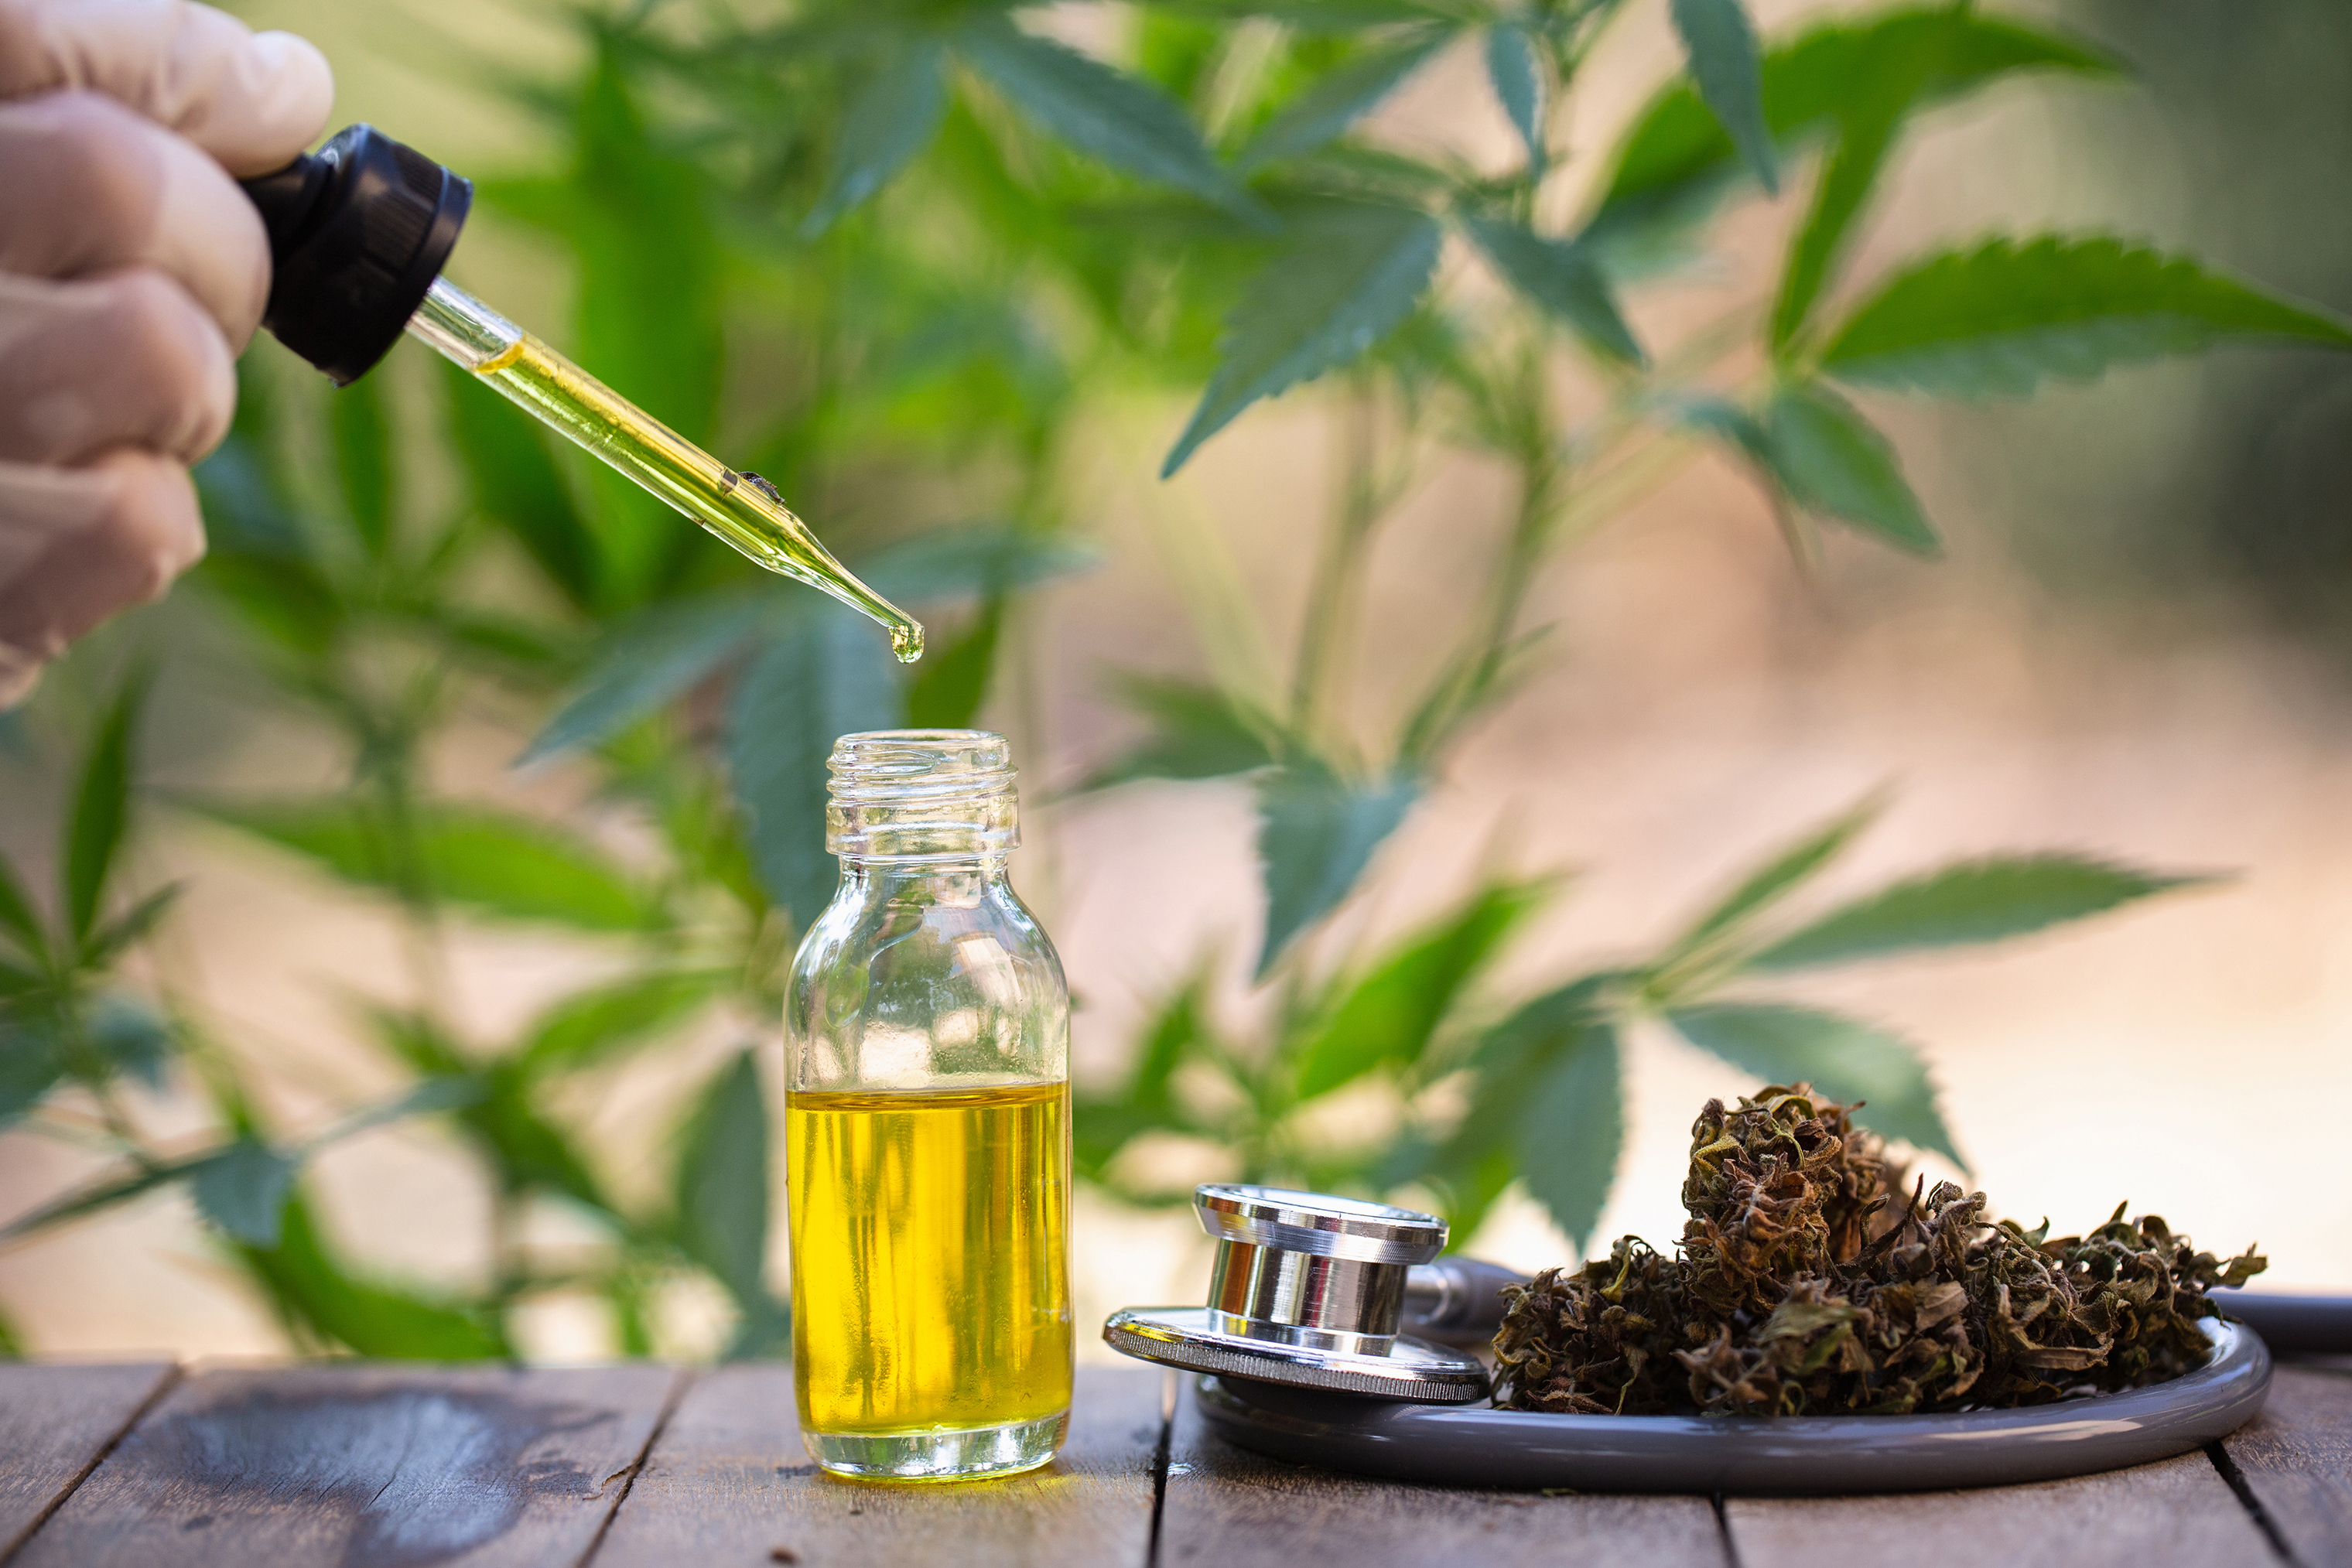 How Much Cbd Oil To Take For Thyroid Cancer - Cbd|Oil|Cannabidiol|Products|View|Abstract|Effects|Hemp|Cannabis|Product|Thc|Pain|People|Health|Body|Plant|Cannabinoids|Medications|Oils|Drug|Benefits|System|Study|Marijuana|Anxiety|Side|Research|Effect|Liver|Quality|Treatment|Studies|Epilepsy|Symptoms|Gummies|Compounds|Dose|Time|Inflammation|Bottle|Cbd Oil|View Abstract|Side Effects|Cbd Products|Endocannabinoid System|Multiple Sclerosis|Cbd Oils|Cbd Gummies|Cannabis Plant|Hemp Oil|Cbd Product|Hemp Plant|United States|Cytochrome P450|Many People|Chronic Pain|Nuleaf Naturals|Royal Cbd|Full-Spectrum Cbd Oil|Drug Administration|Cbd Oil Products|Medical Marijuana|Drug Test|Heavy Metals|Clinical Trial|Clinical Trials|Cbd Oil Side|Rating Highlights|Wide Variety|Animal Studies